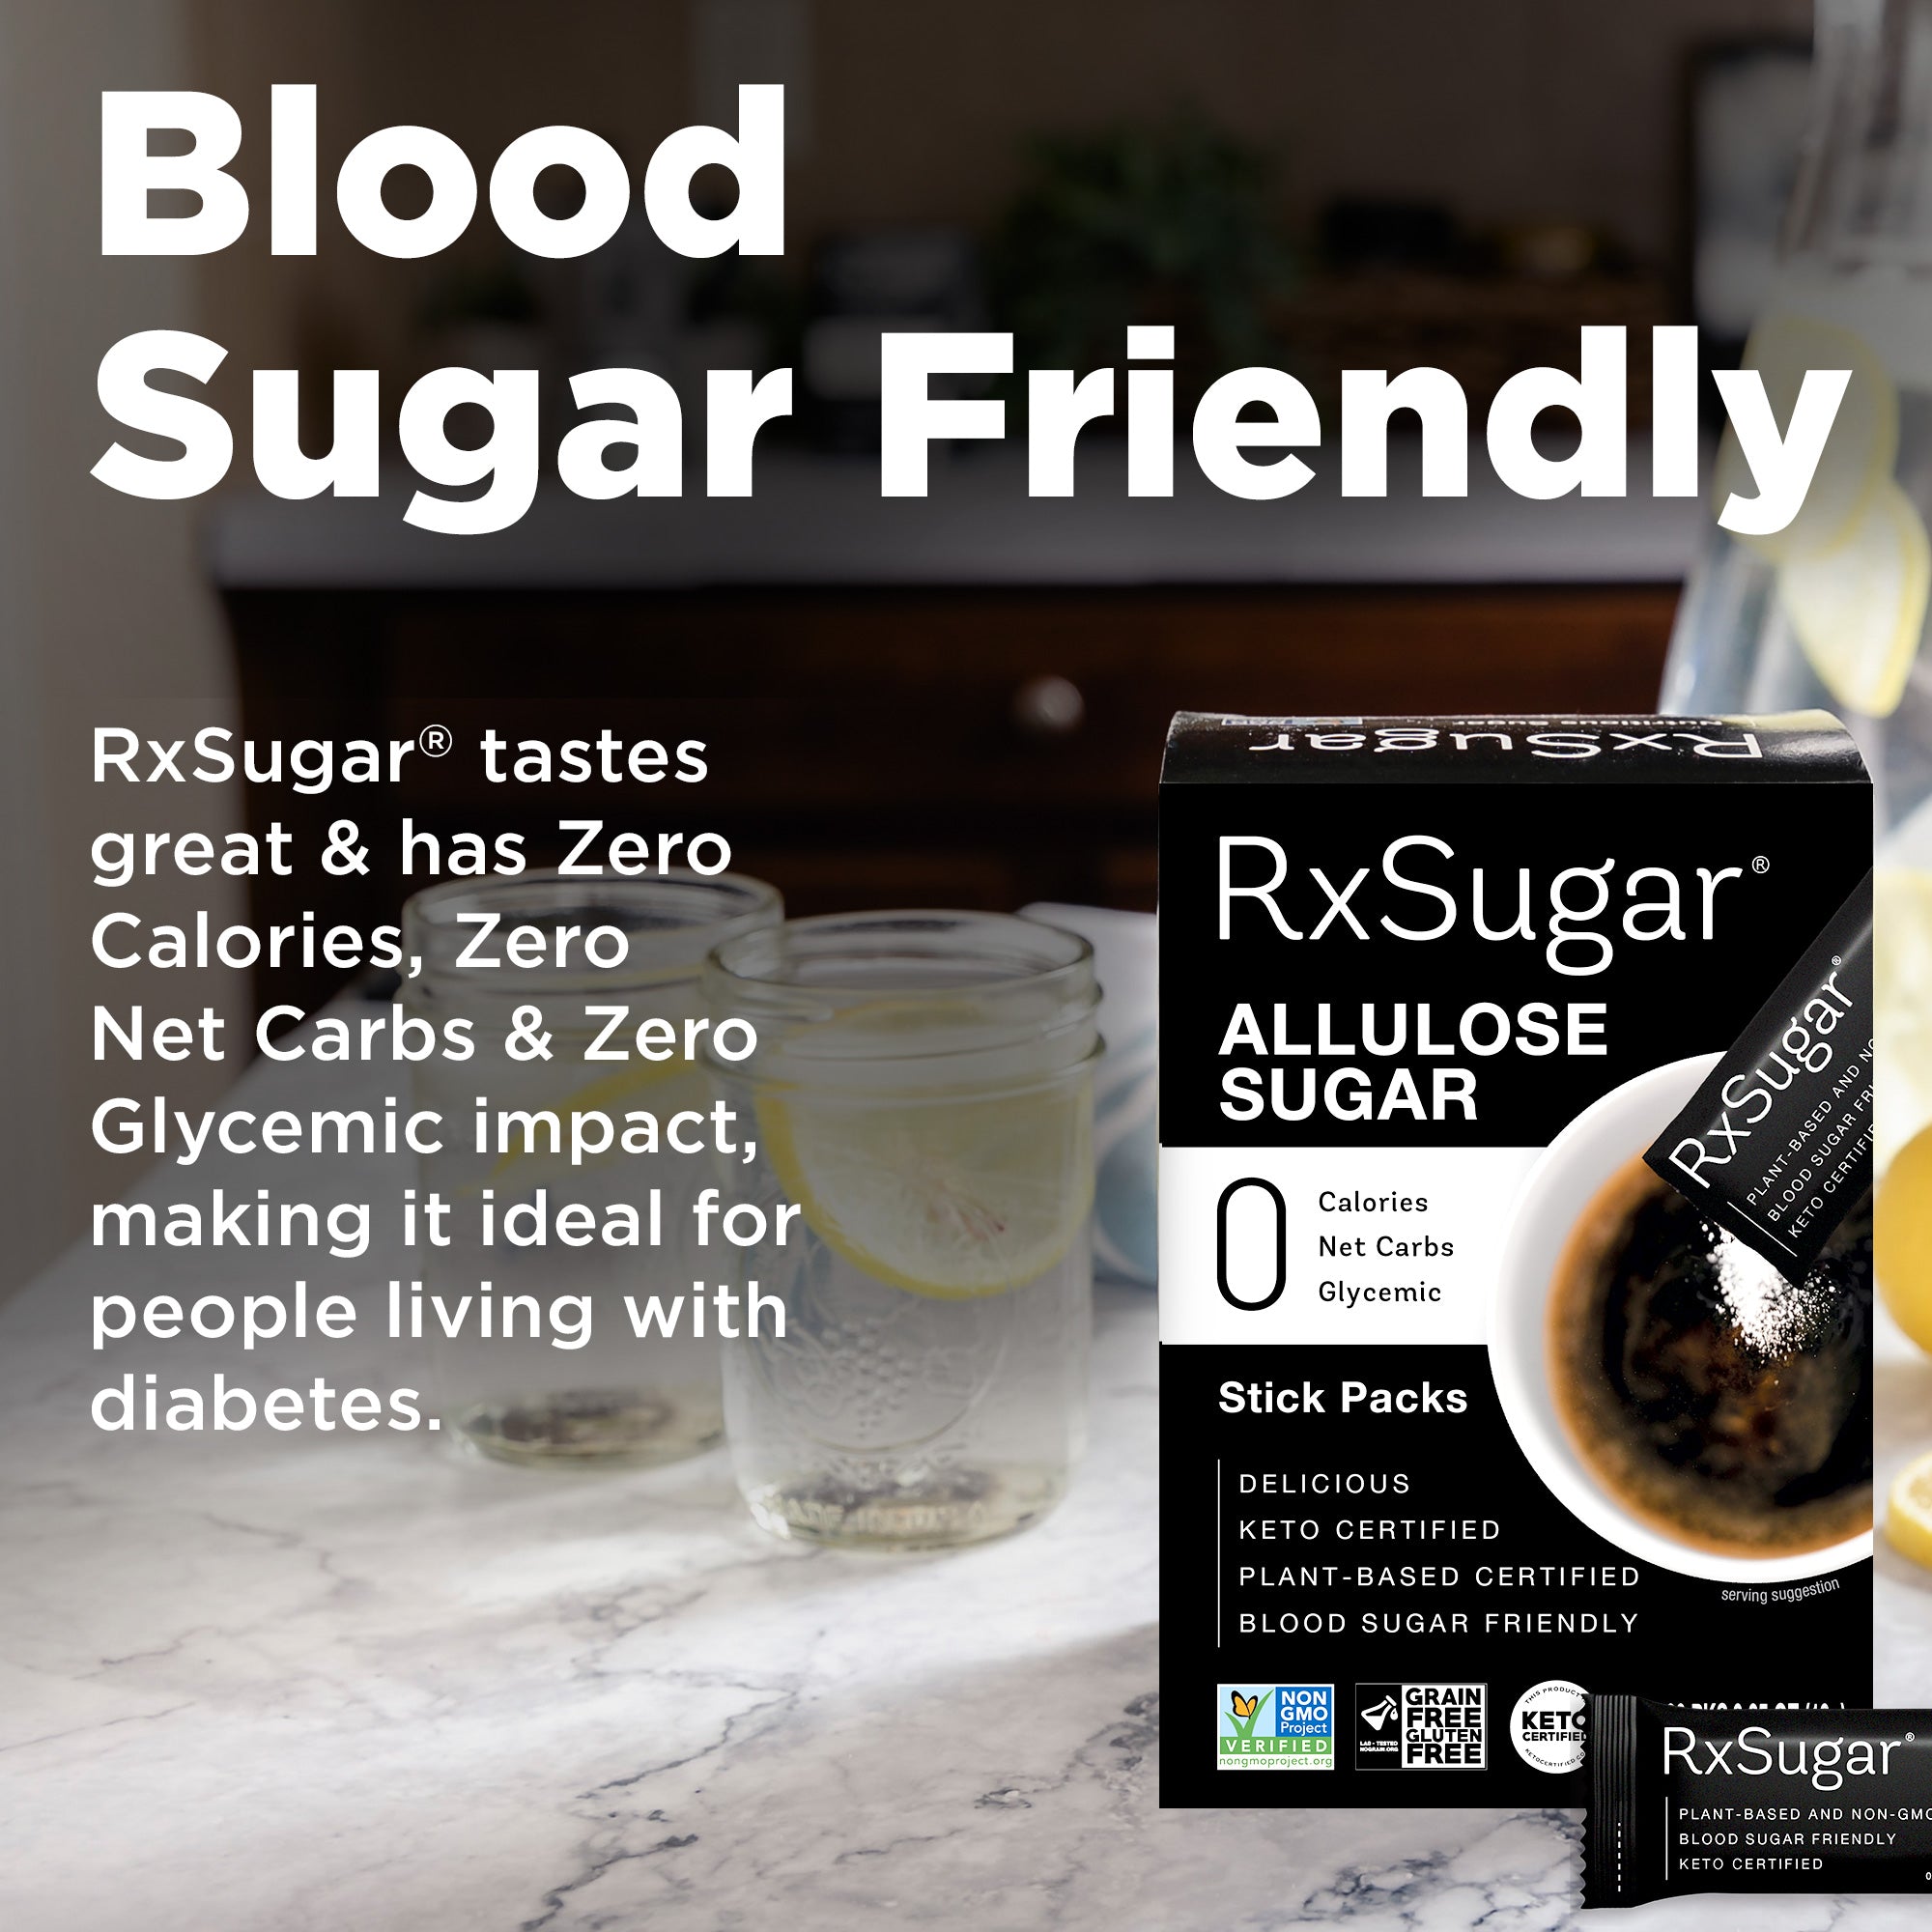 Blood Sugar Friendly - tastes great and has zero calories, zero net carbs and zero glycemic index.